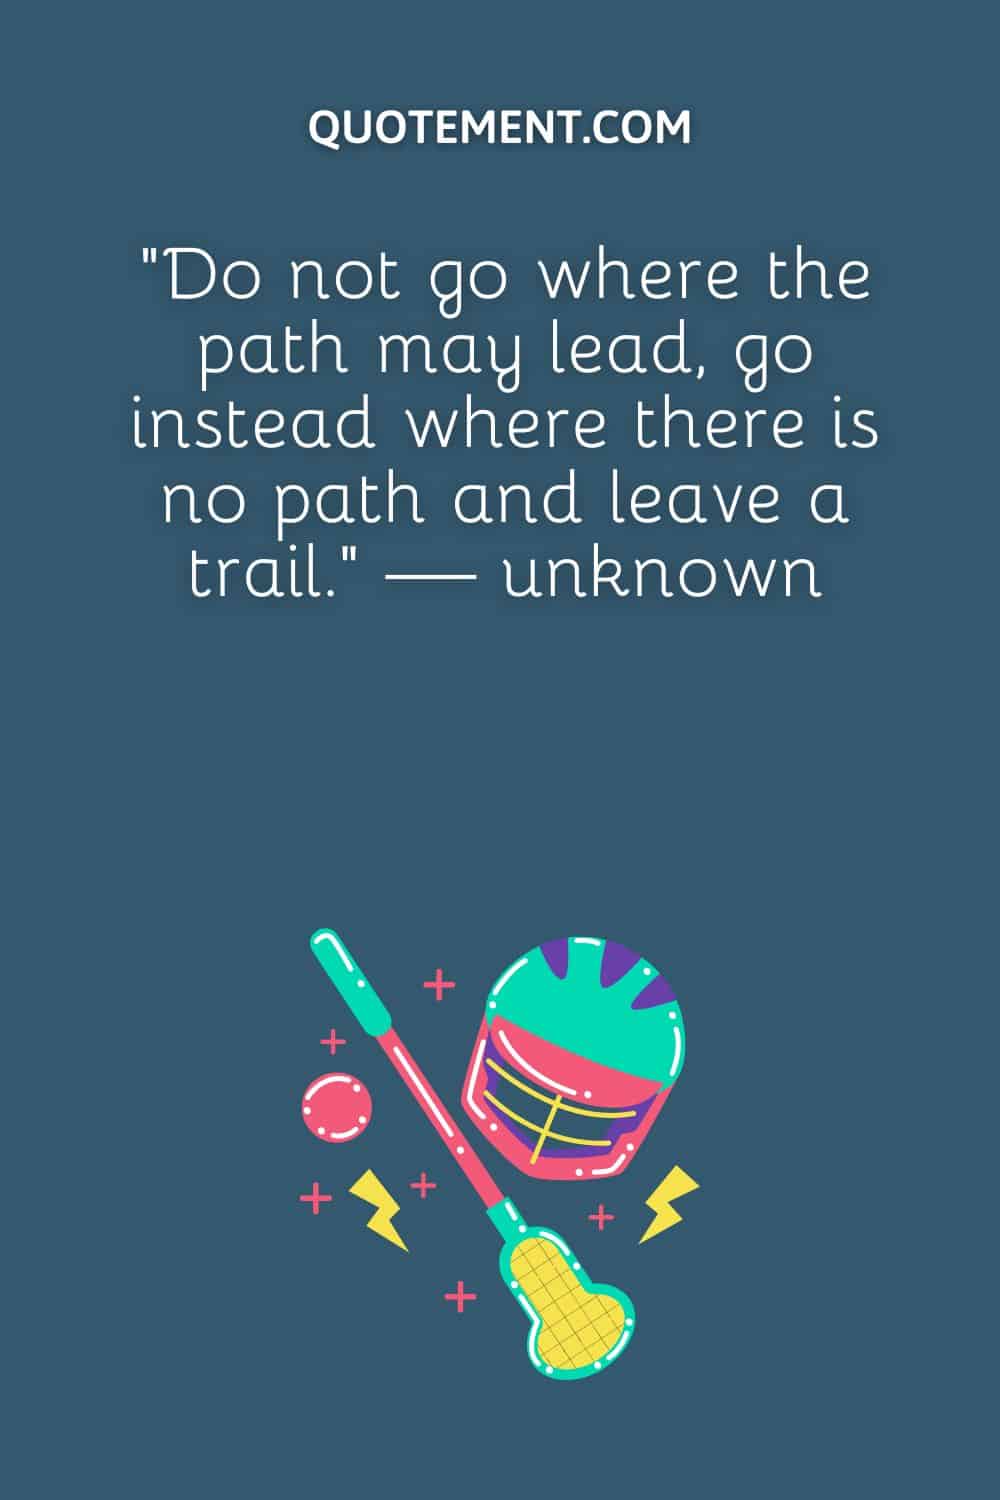 “Do not go where the path may lead, go instead where there is no path and leave a trail.” — unknown